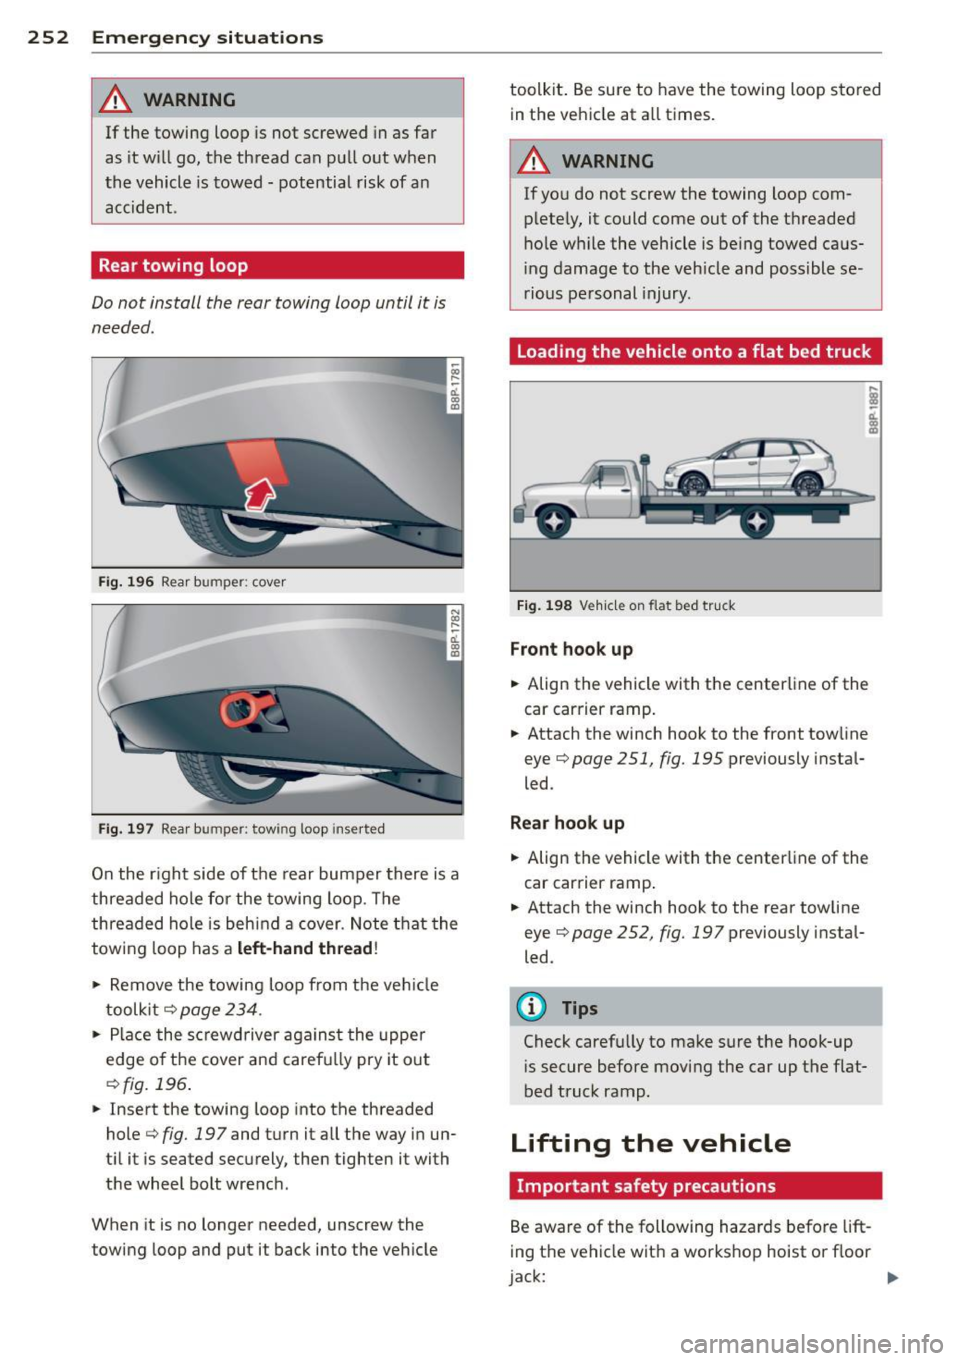 AUDI A3 2012  Owner´s Manual 252  Emergency situations 
A WARNING 
If the  towing  loop is not  screwed  in as  far 
as  it  will  go,  the  thread  can  pull  out  when 
the  vehicle  is towed -potential  risk of  an 
accident .